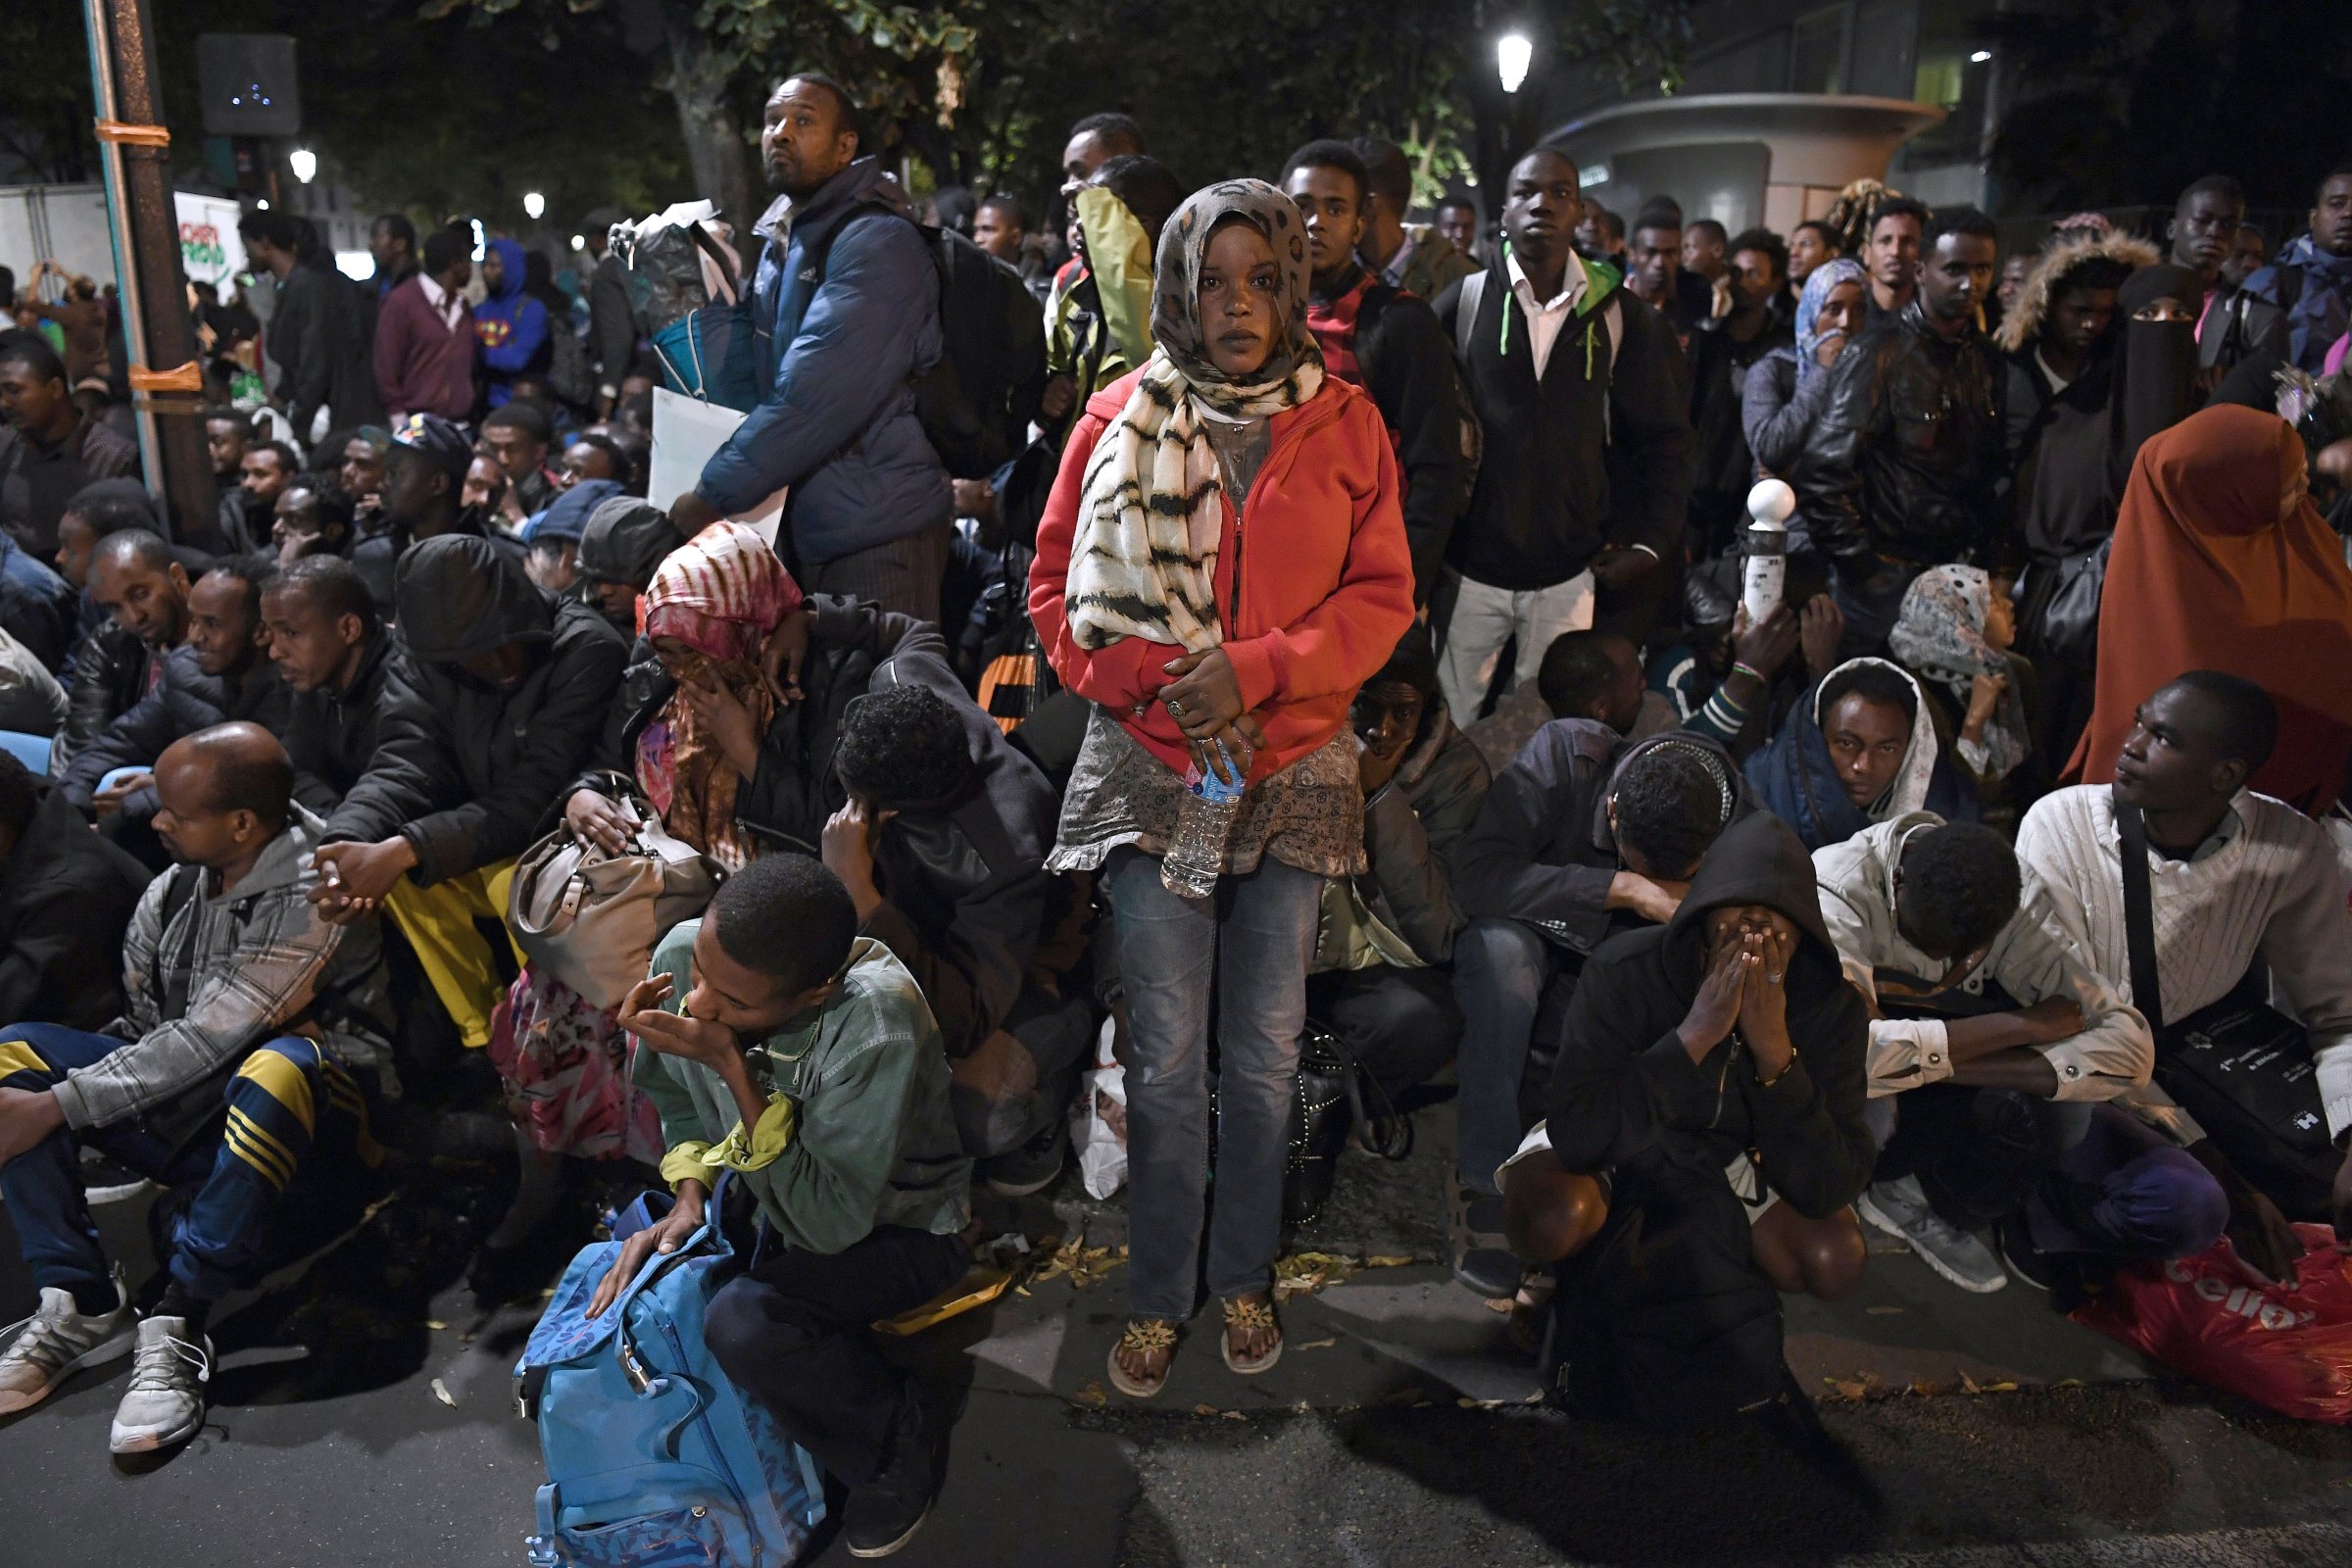 Migrants gather and wait before being evacuated from a makeshift migrant camp set up between the metro stations of Jaures and Stalingrad, in Paris on Sept. 16, 2016.